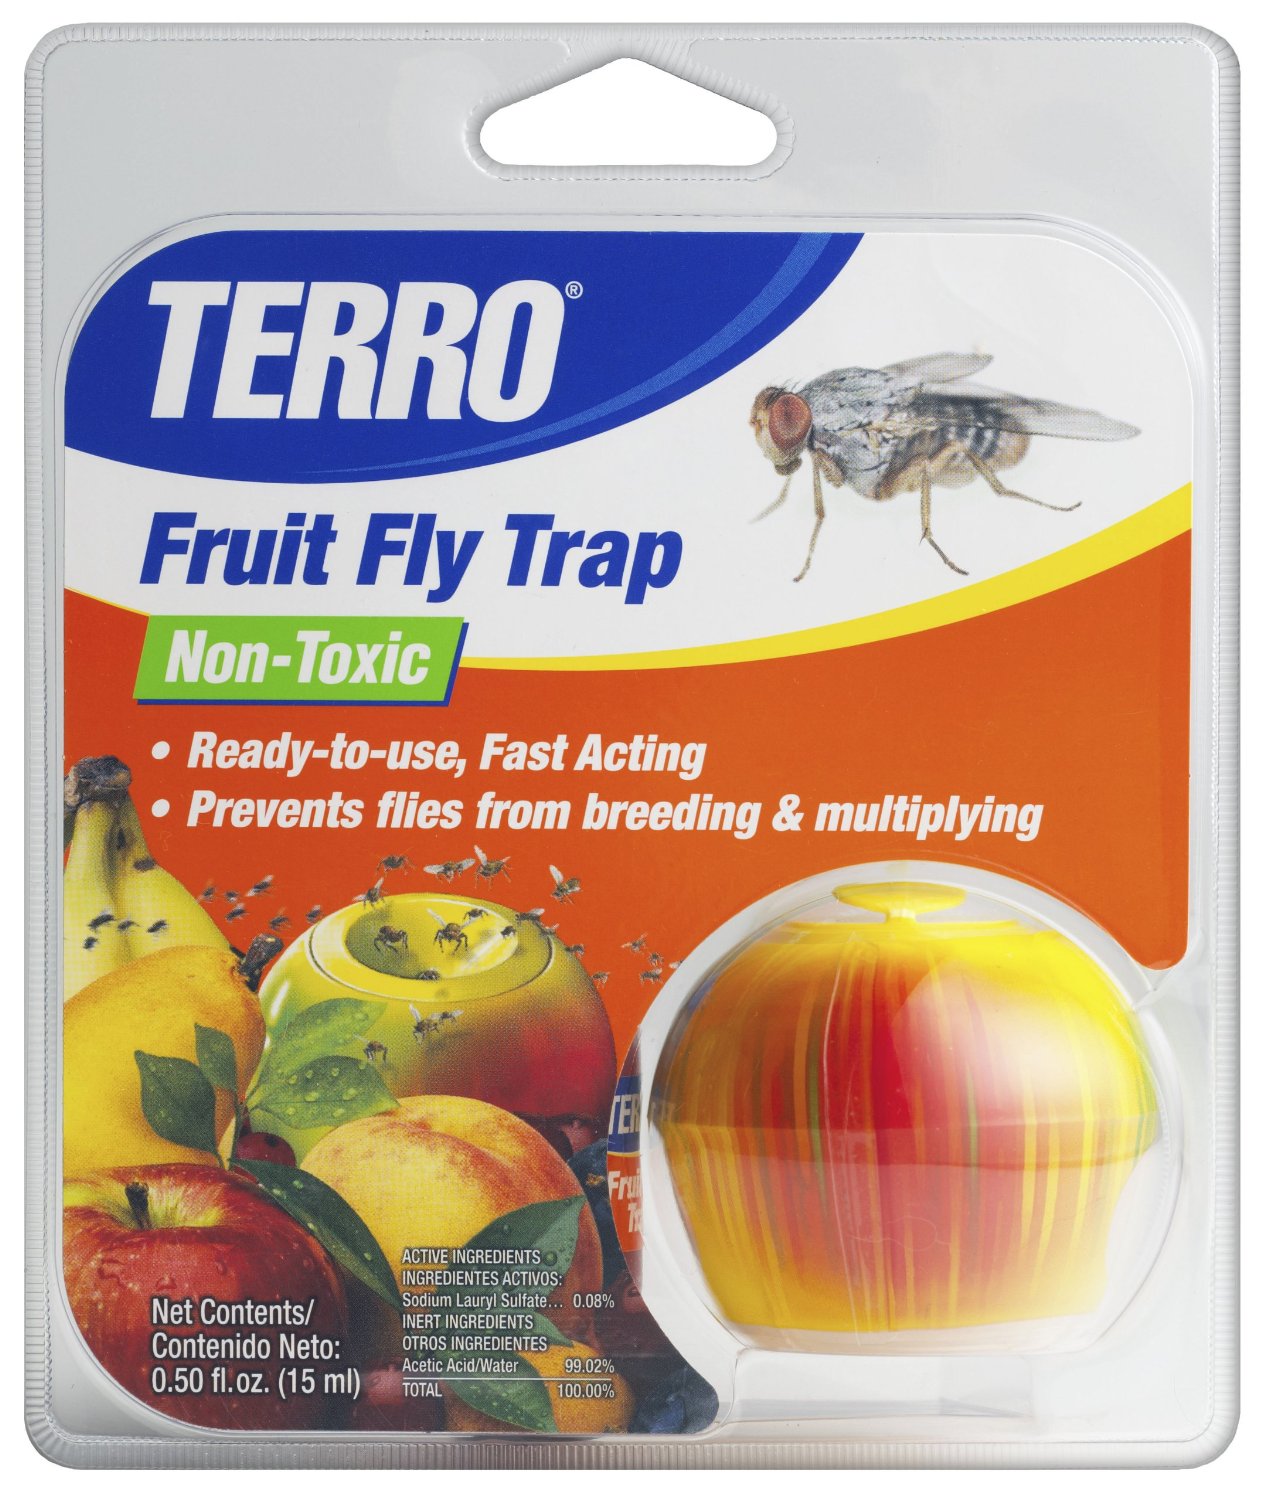 https://ak1.ostkcdn.com/images/products/is/images/602d83ab-8c60-4bc6-80eb-d3c28ec52561/Senoret-Chemical-2500-Terro-Fruit-Fly-Traps-Non-Toxic-Ready-To-Use---Each_3500_3500.jpg